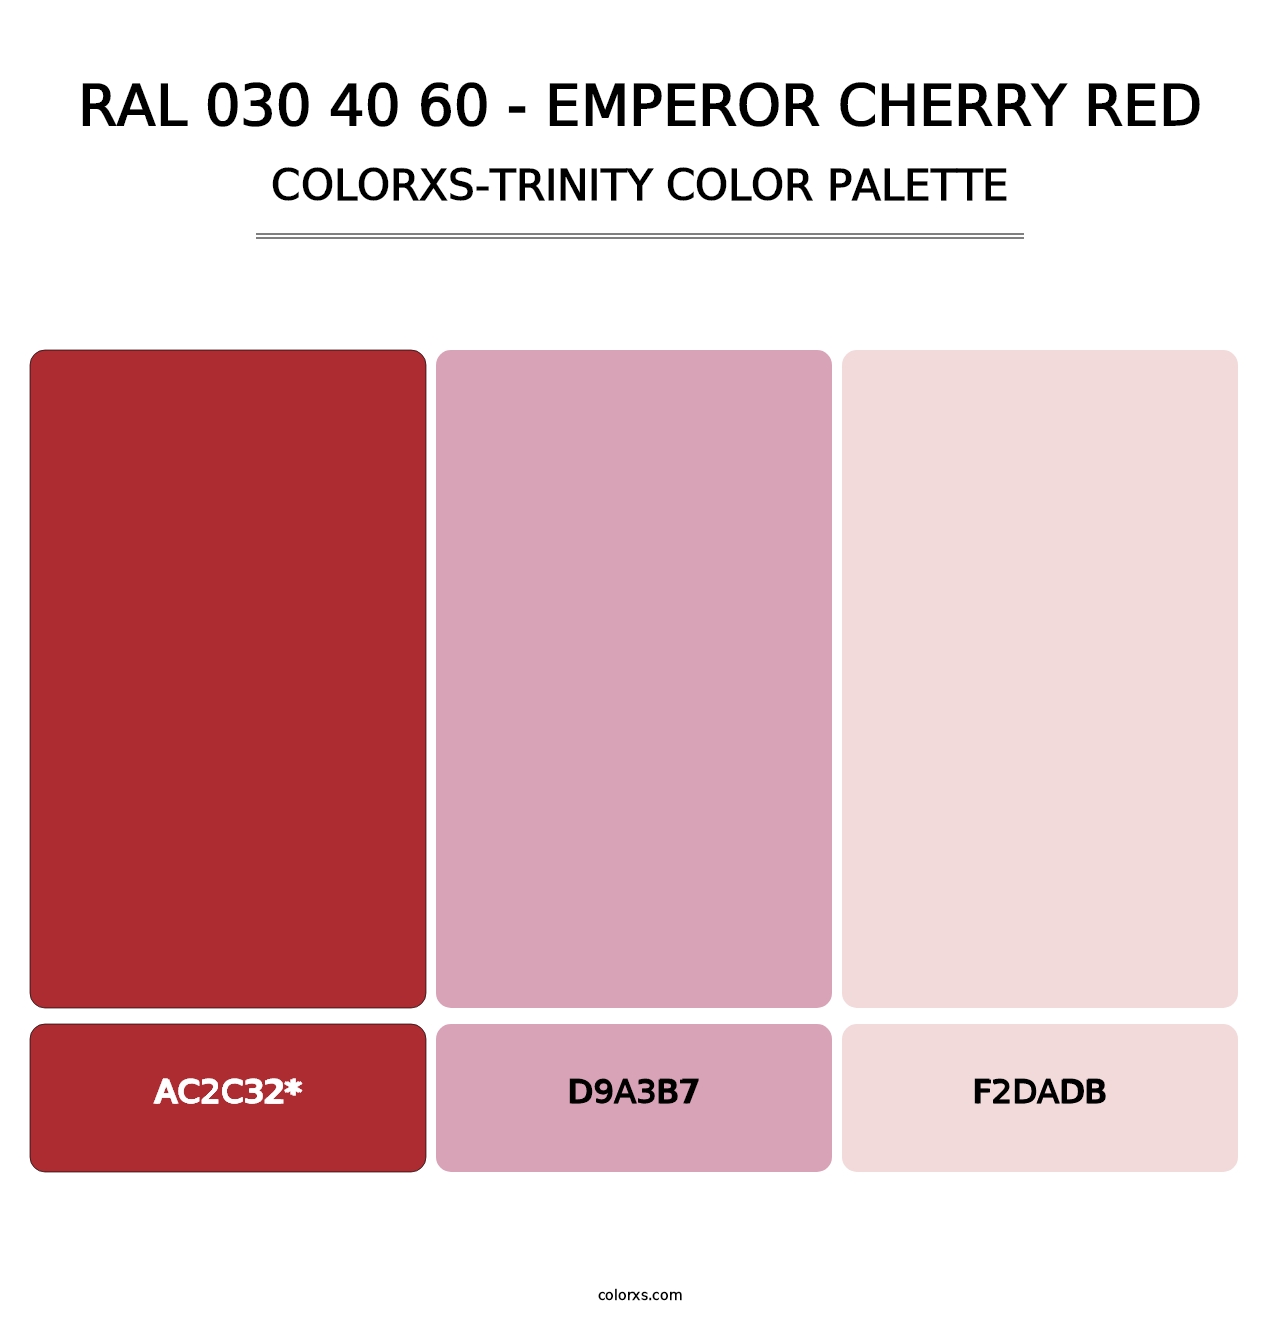 RAL 030 40 60 - Emperor Cherry Red - Colorxs Trinity Palette